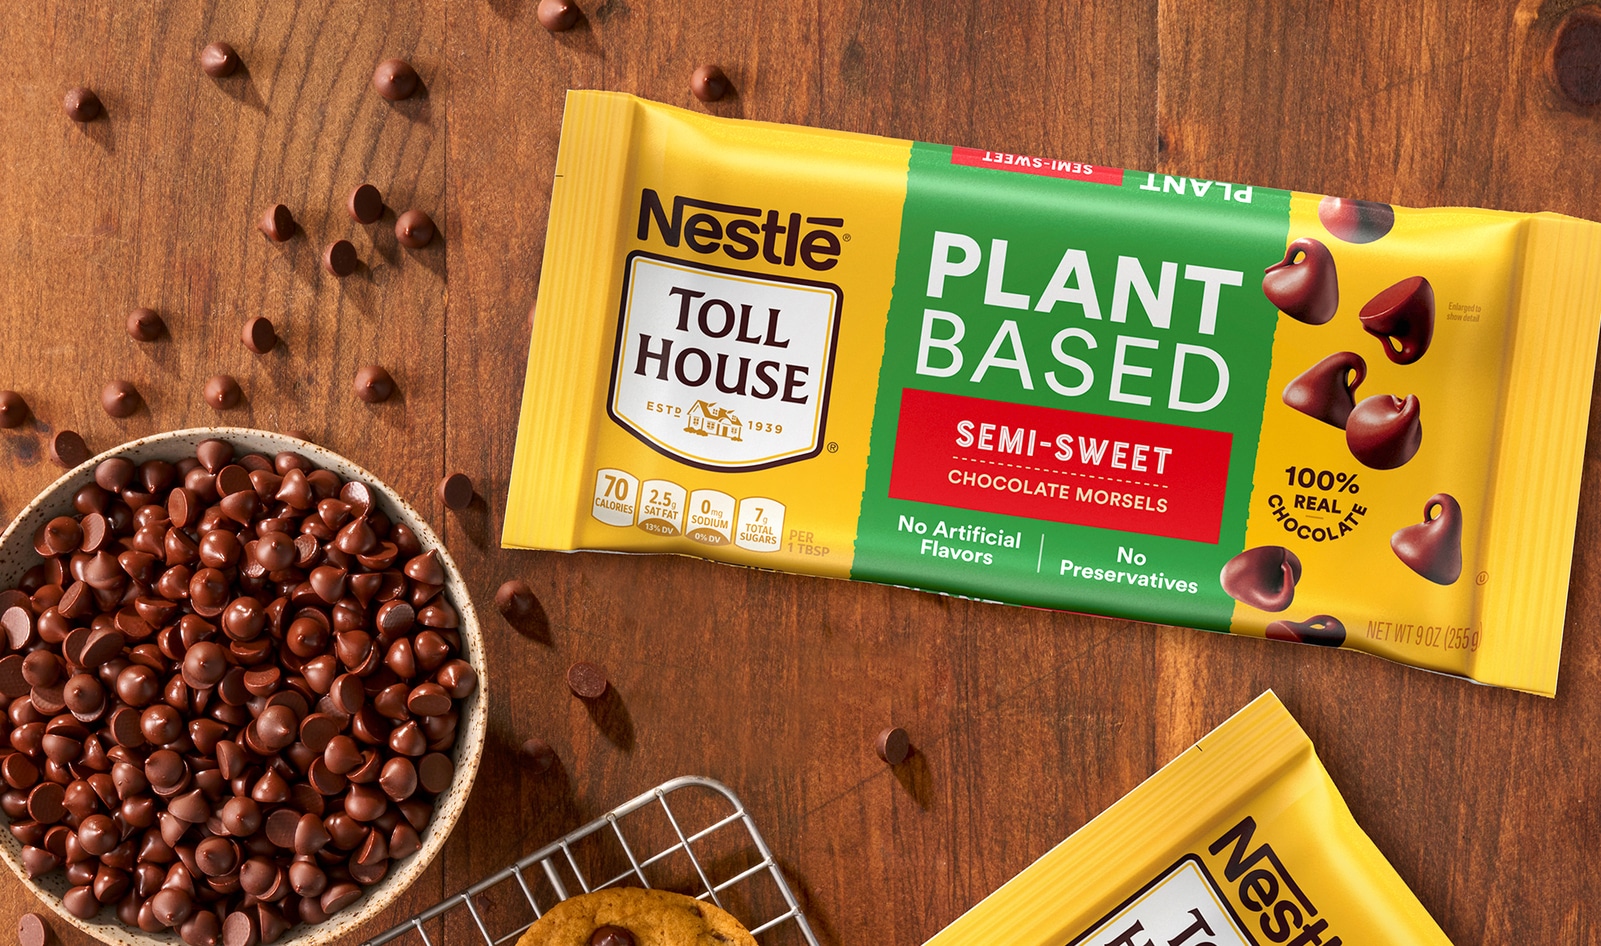 Nestlé’s Plant-Based Focus Is Key to Its Status as the World’s Most Valuable Food Brand